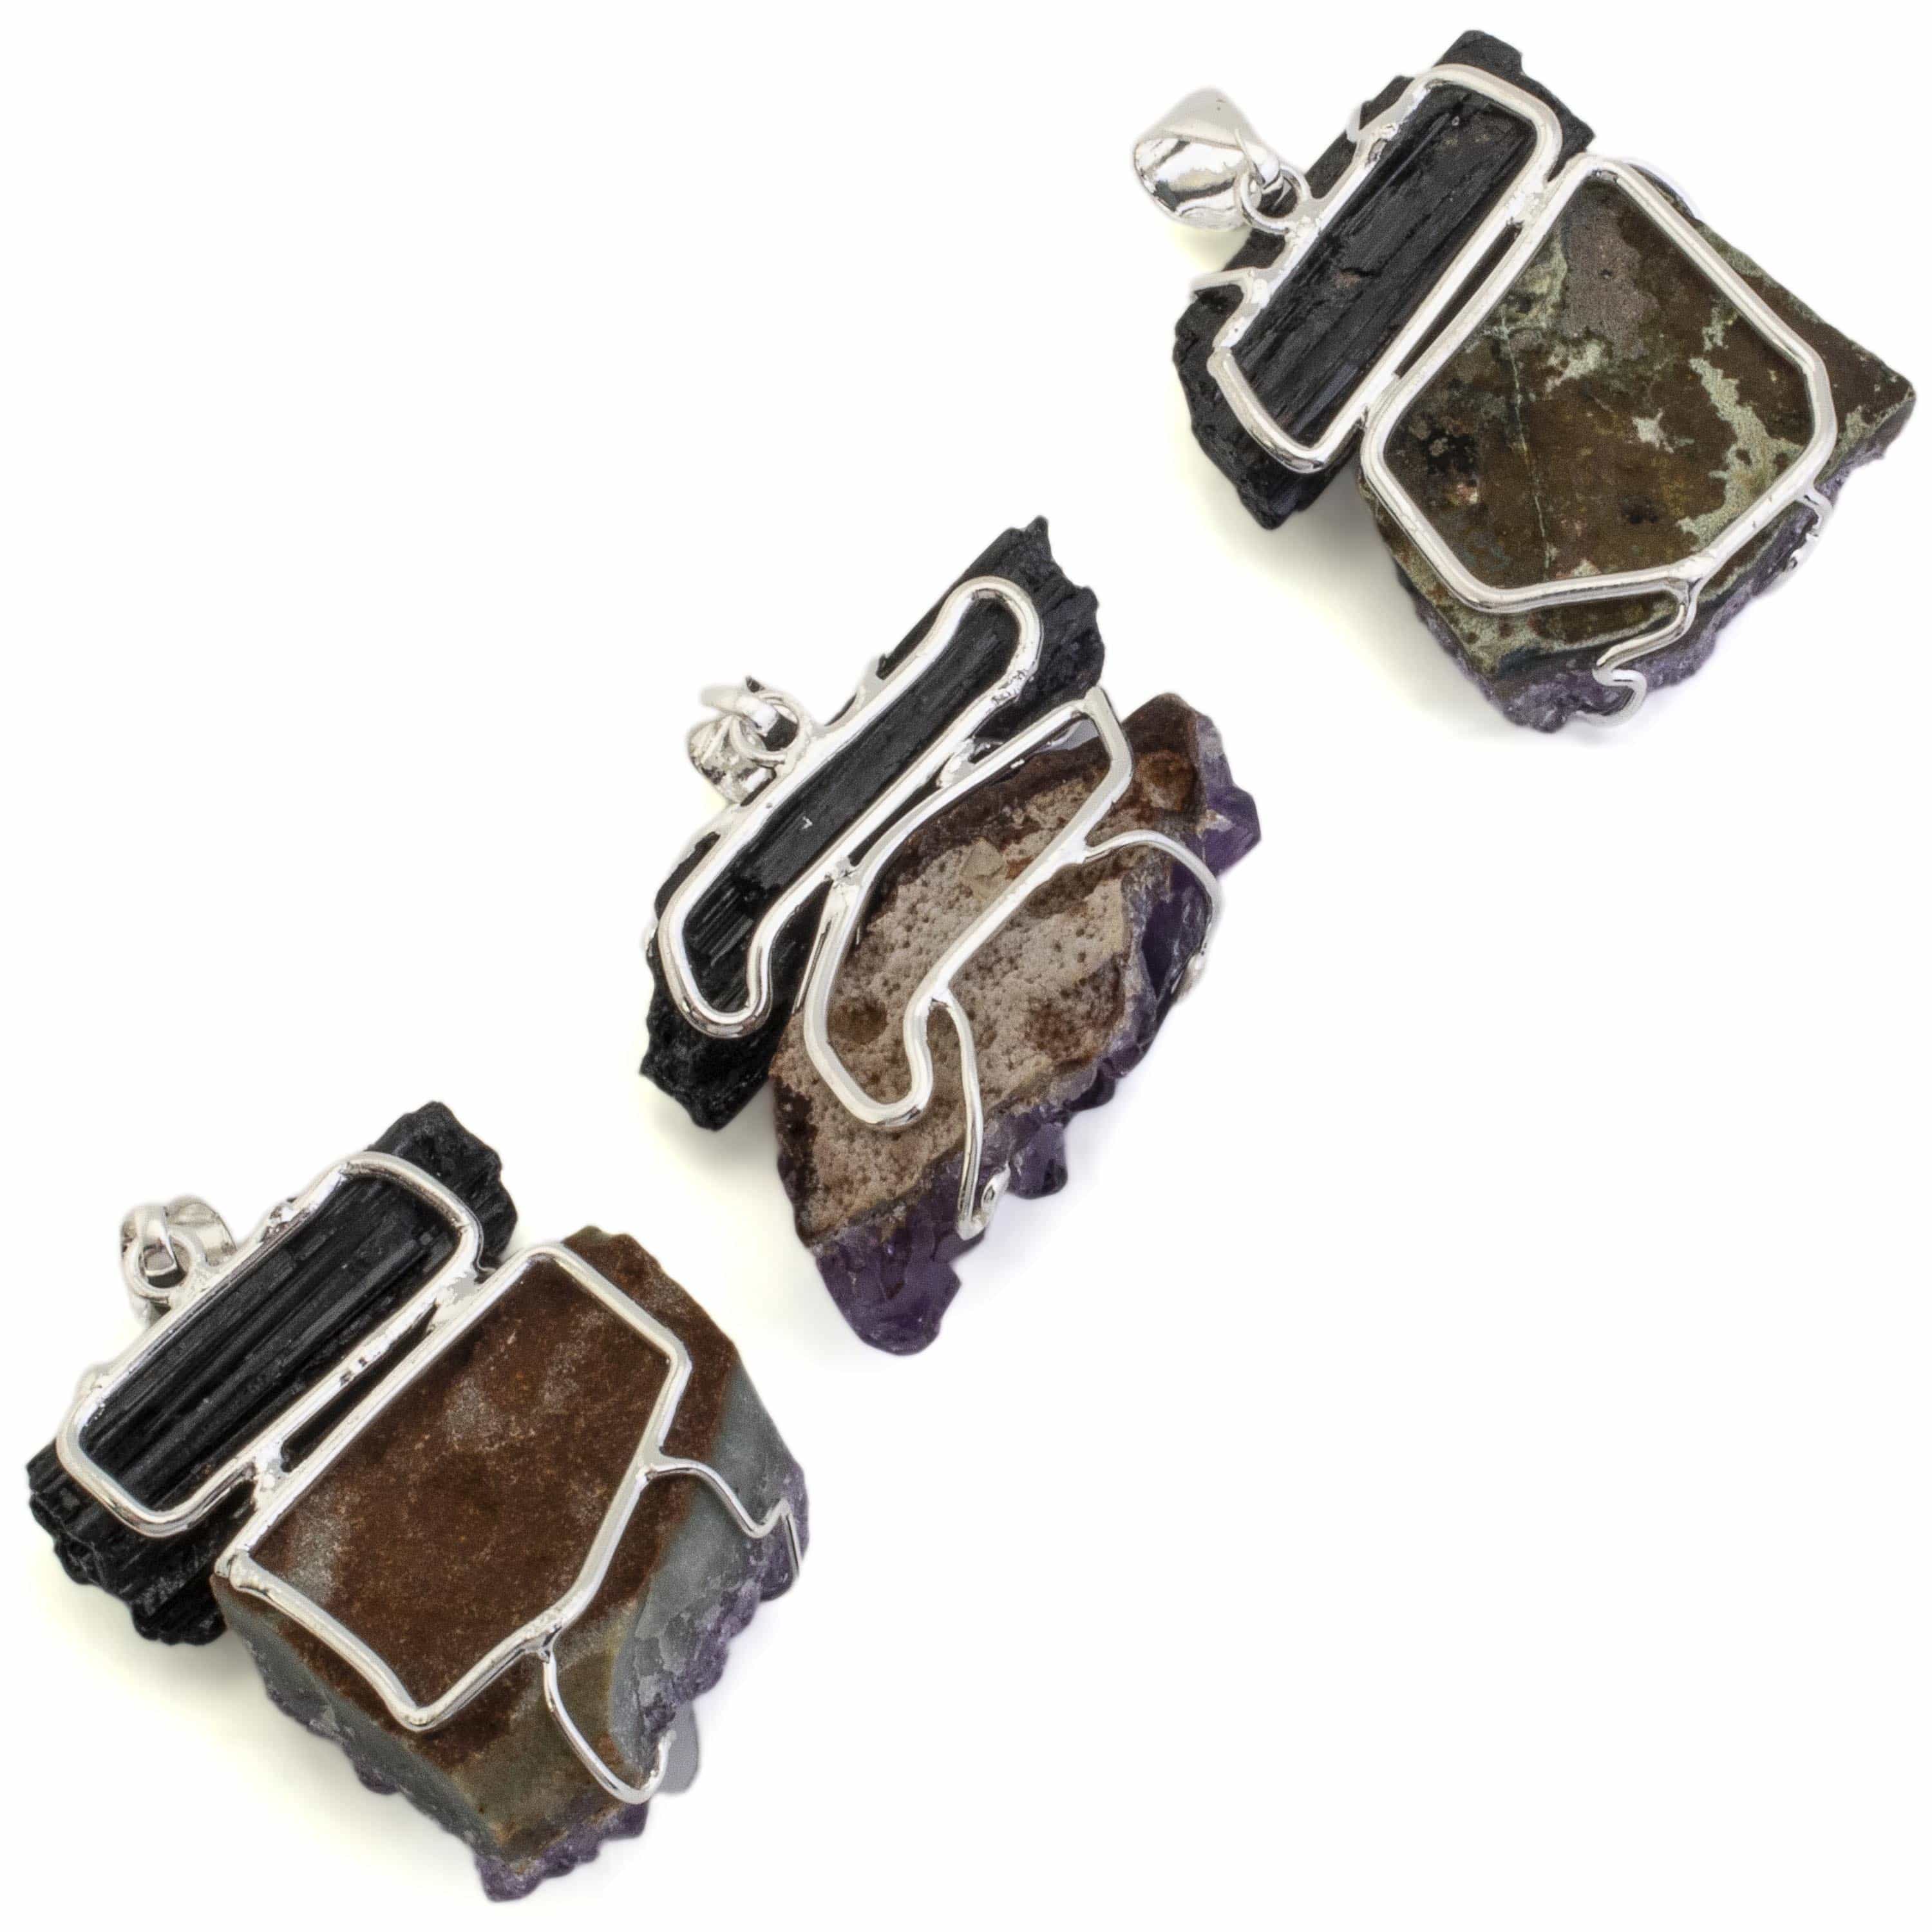 Kalifano Crystal Jewelry Amethyst and Black Tourmaline Pendnant on Chain CJN-2-A+T